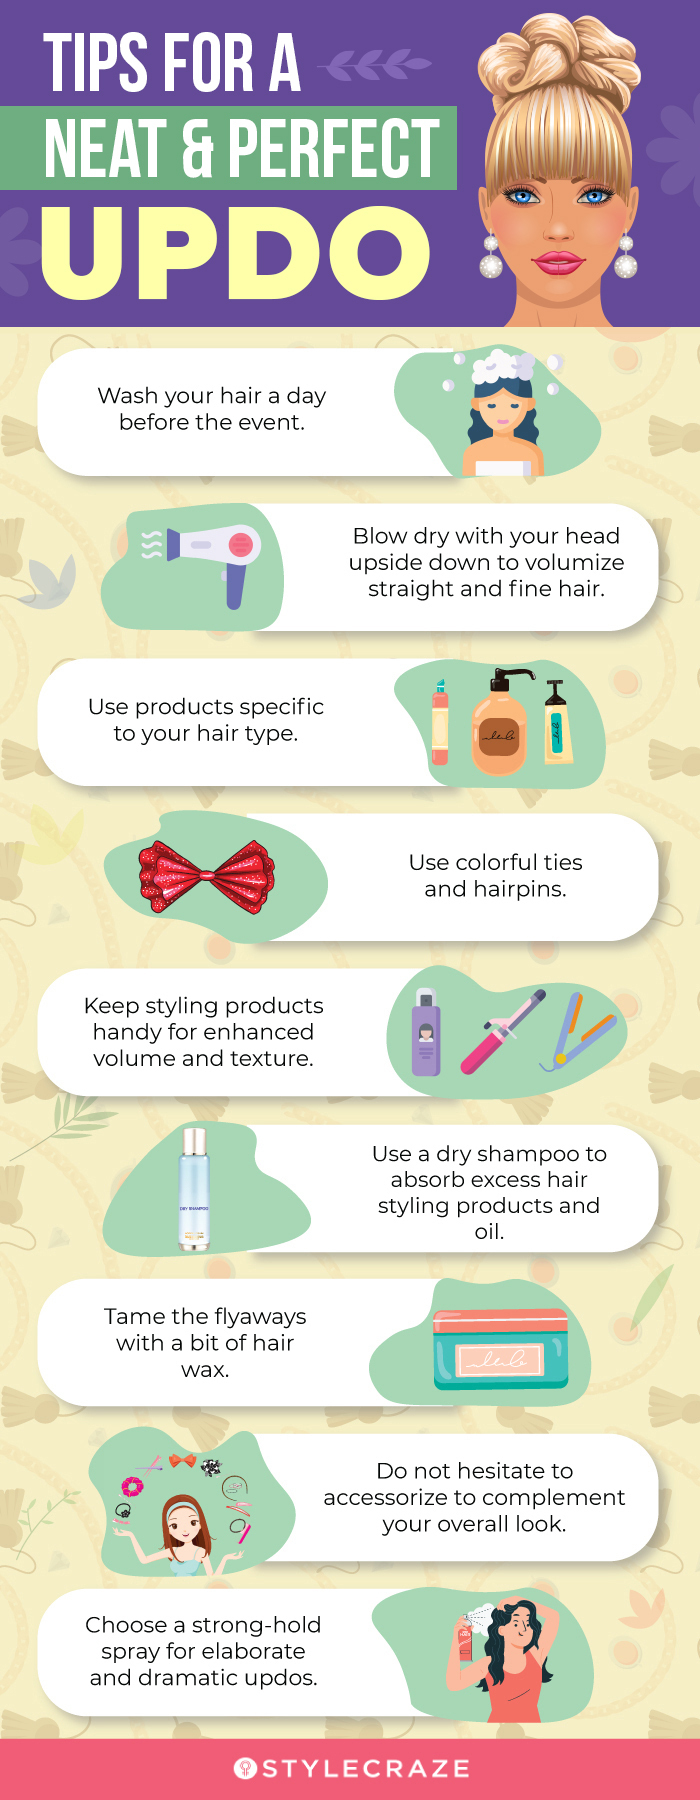 tips for a neat & perfect updo [infographic]